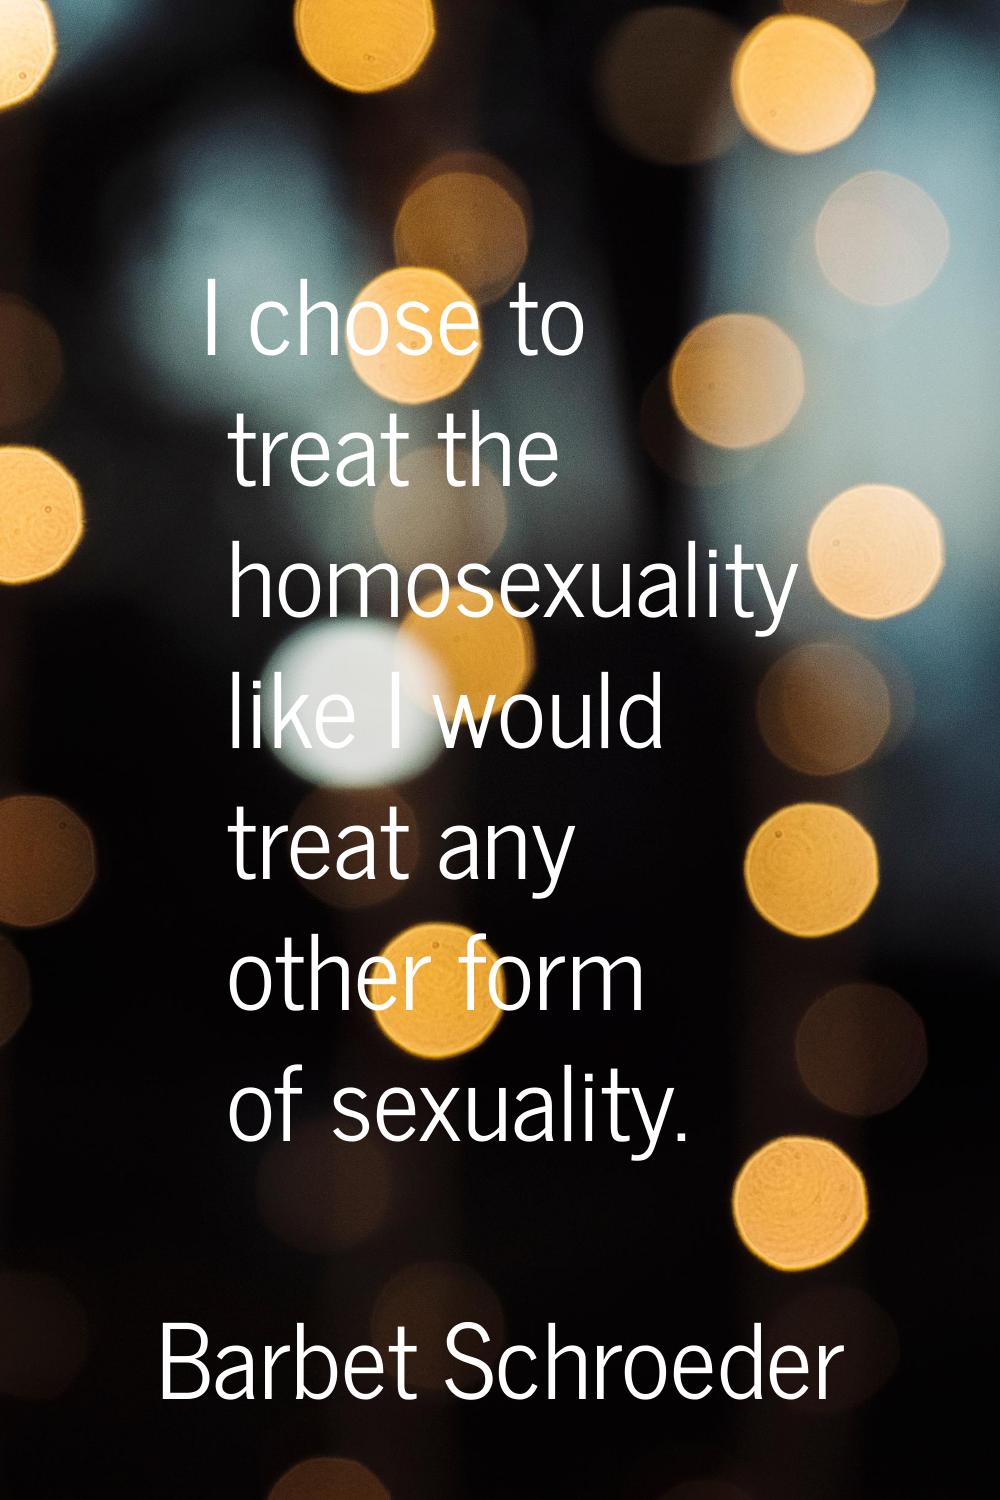 I chose to treat the homosexuality like I would treat any other form of sexuality.